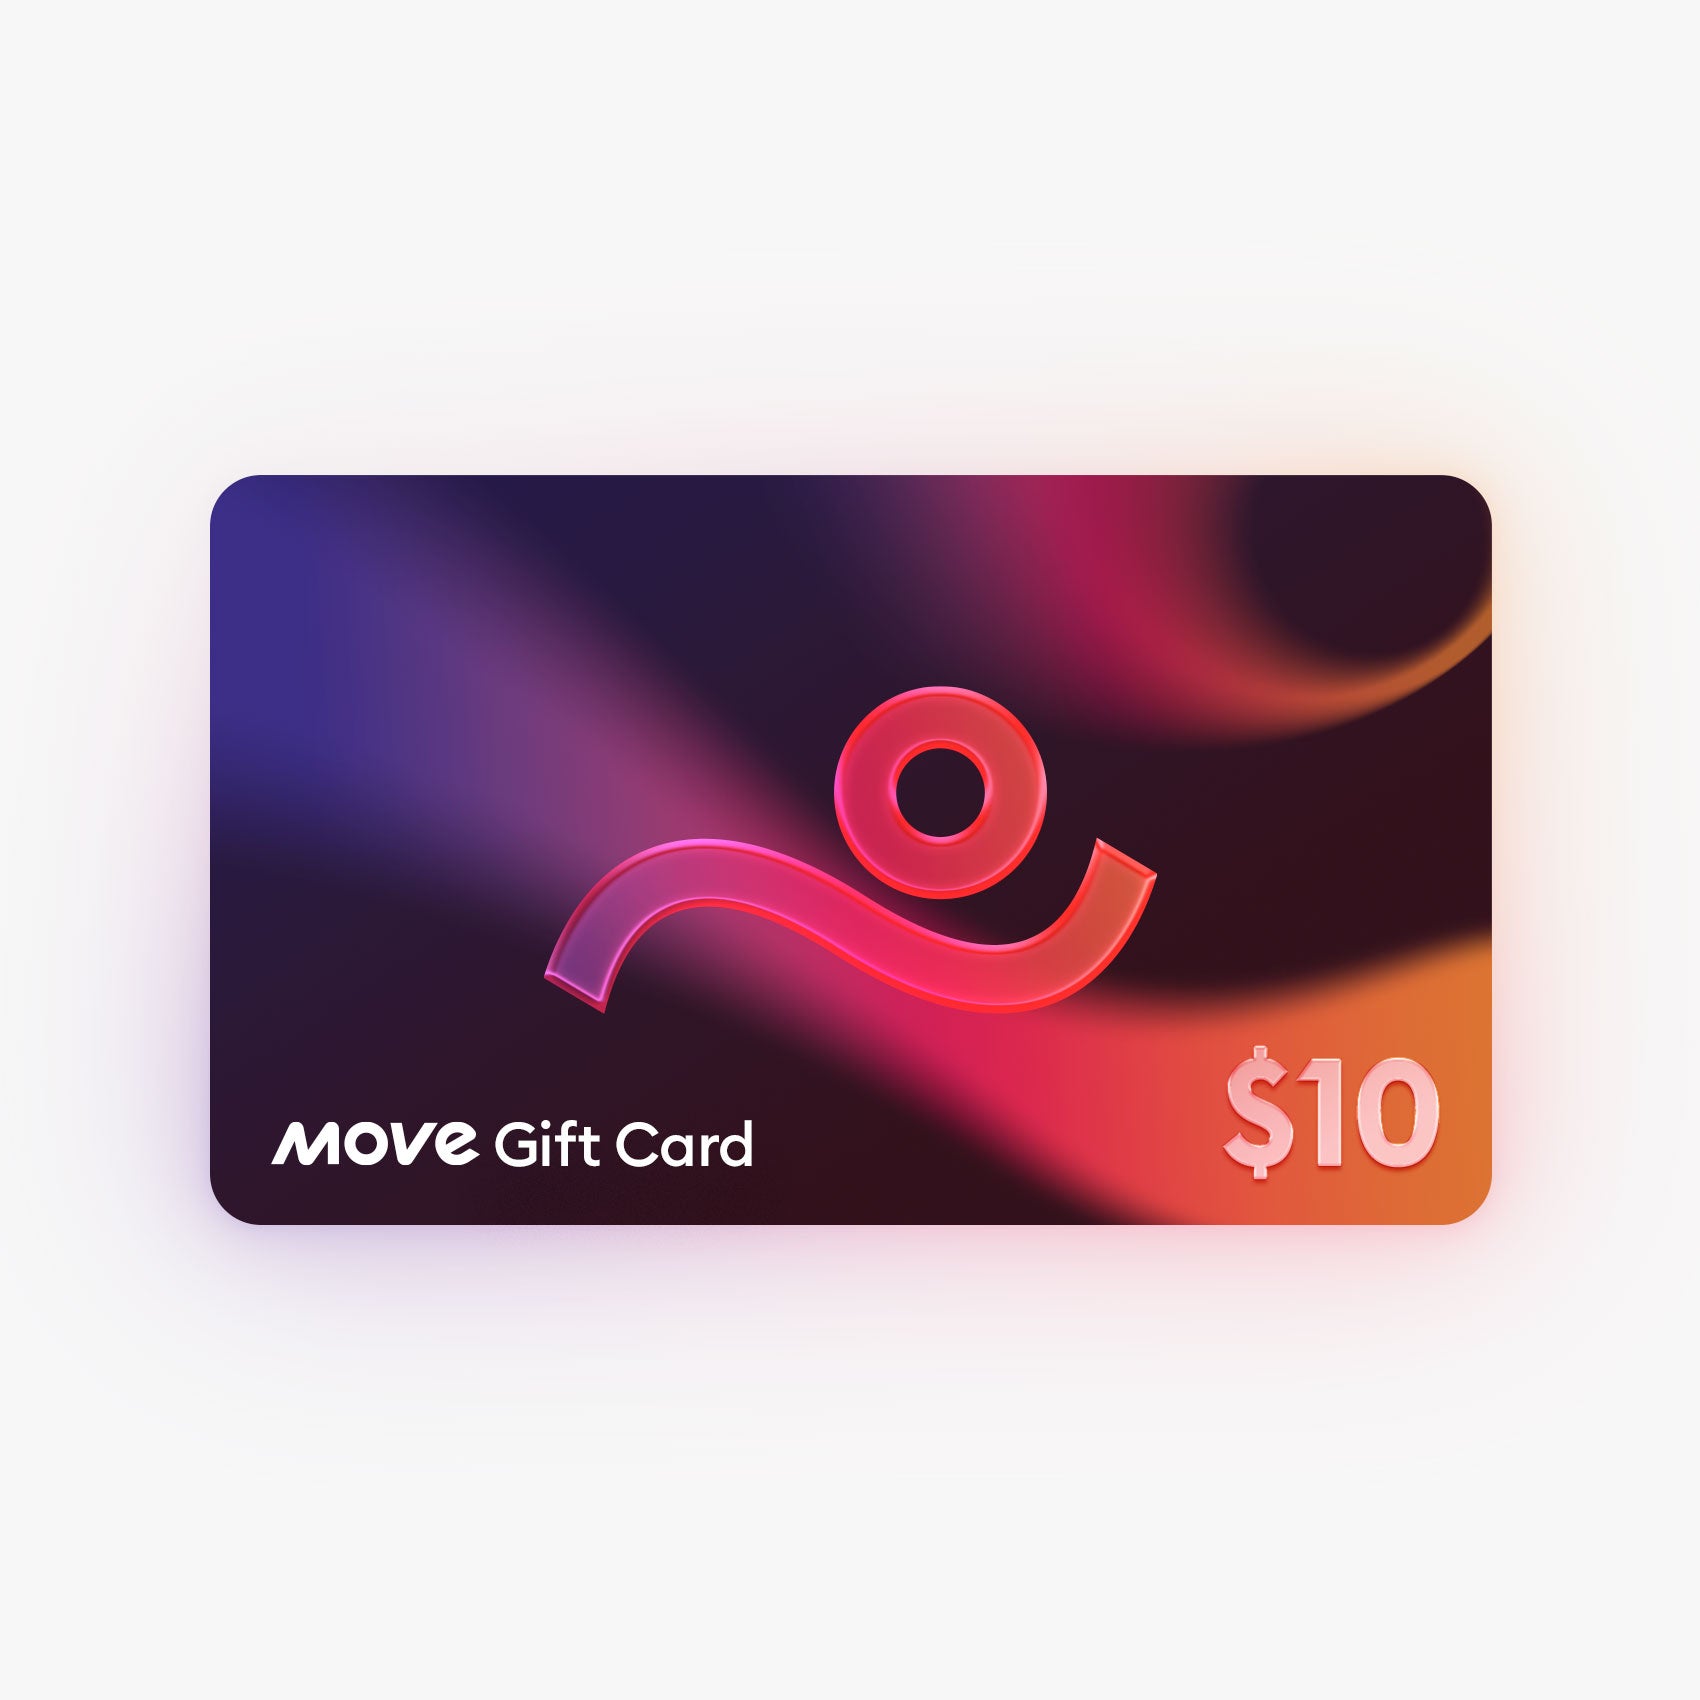 Move Gift Card